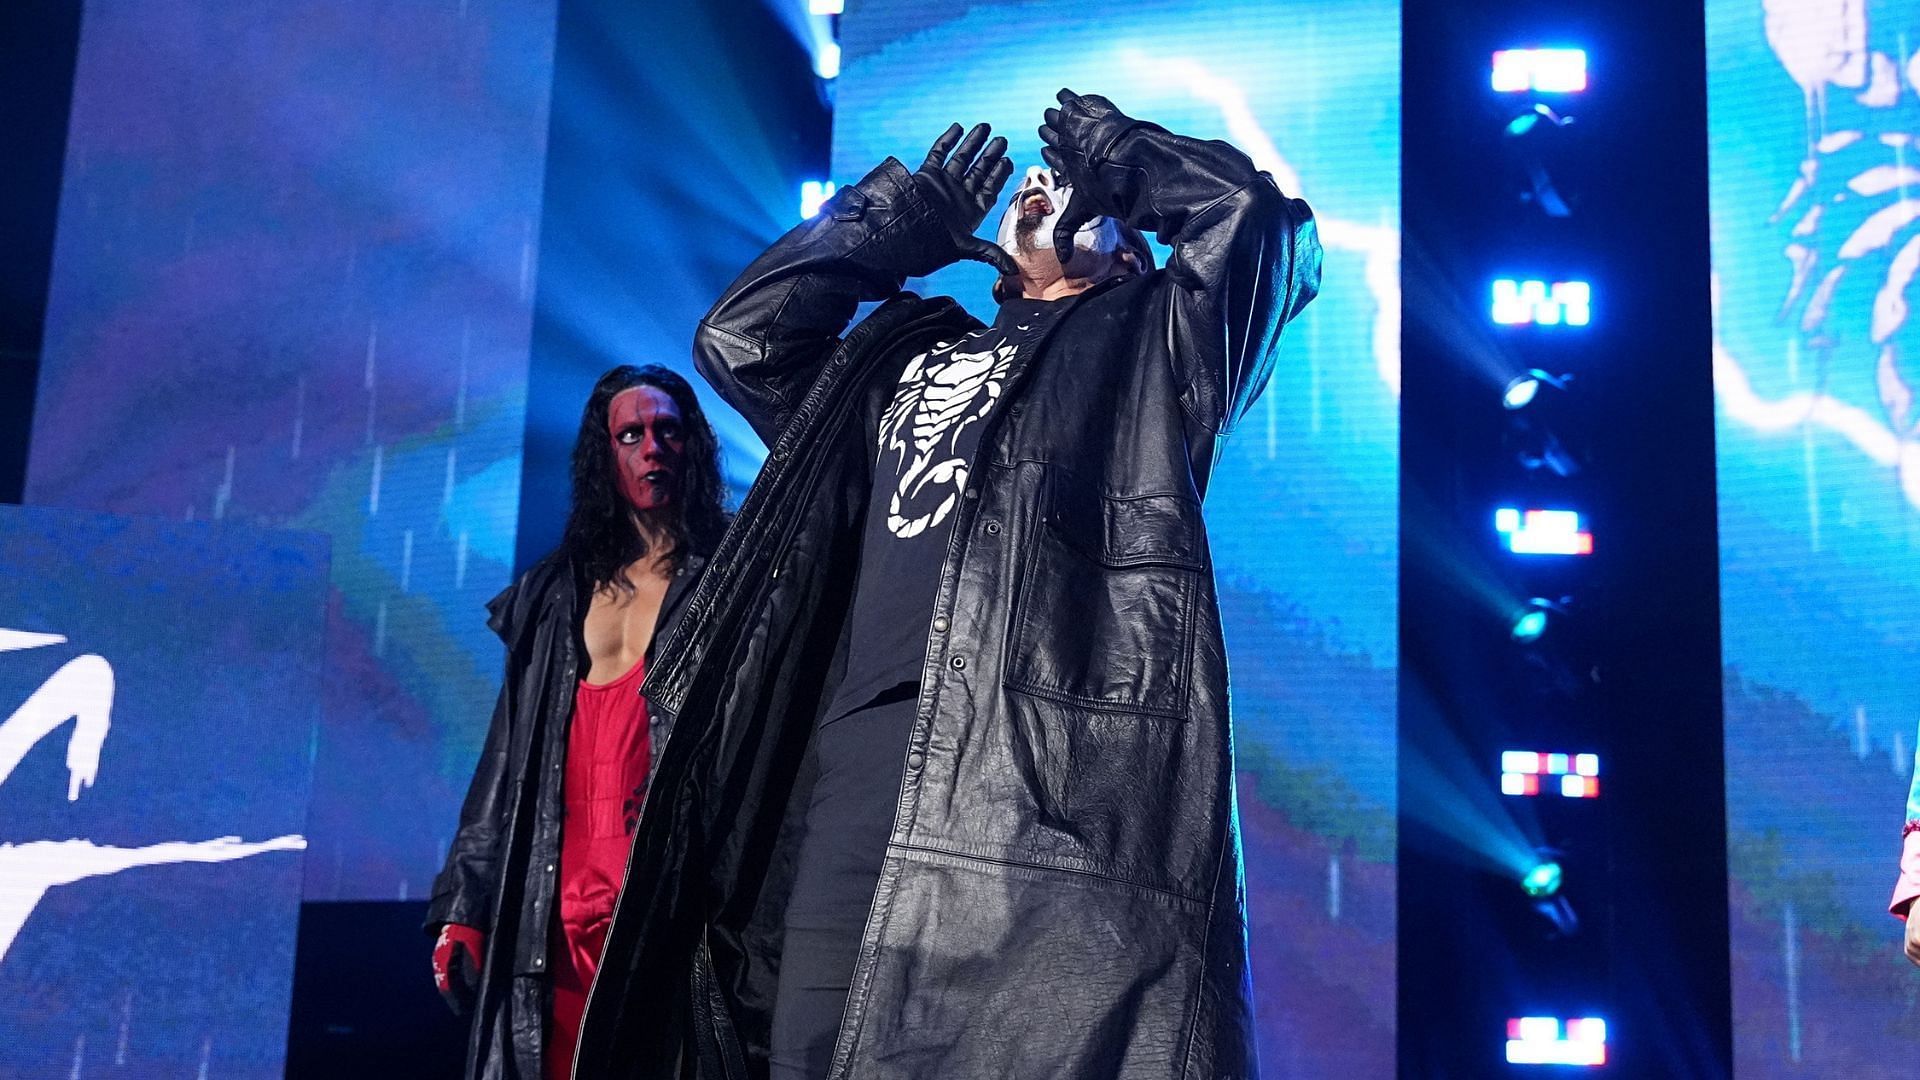 Sting competed in his retirement match two weeks ago at Revolution [Photo courtesy of AEW